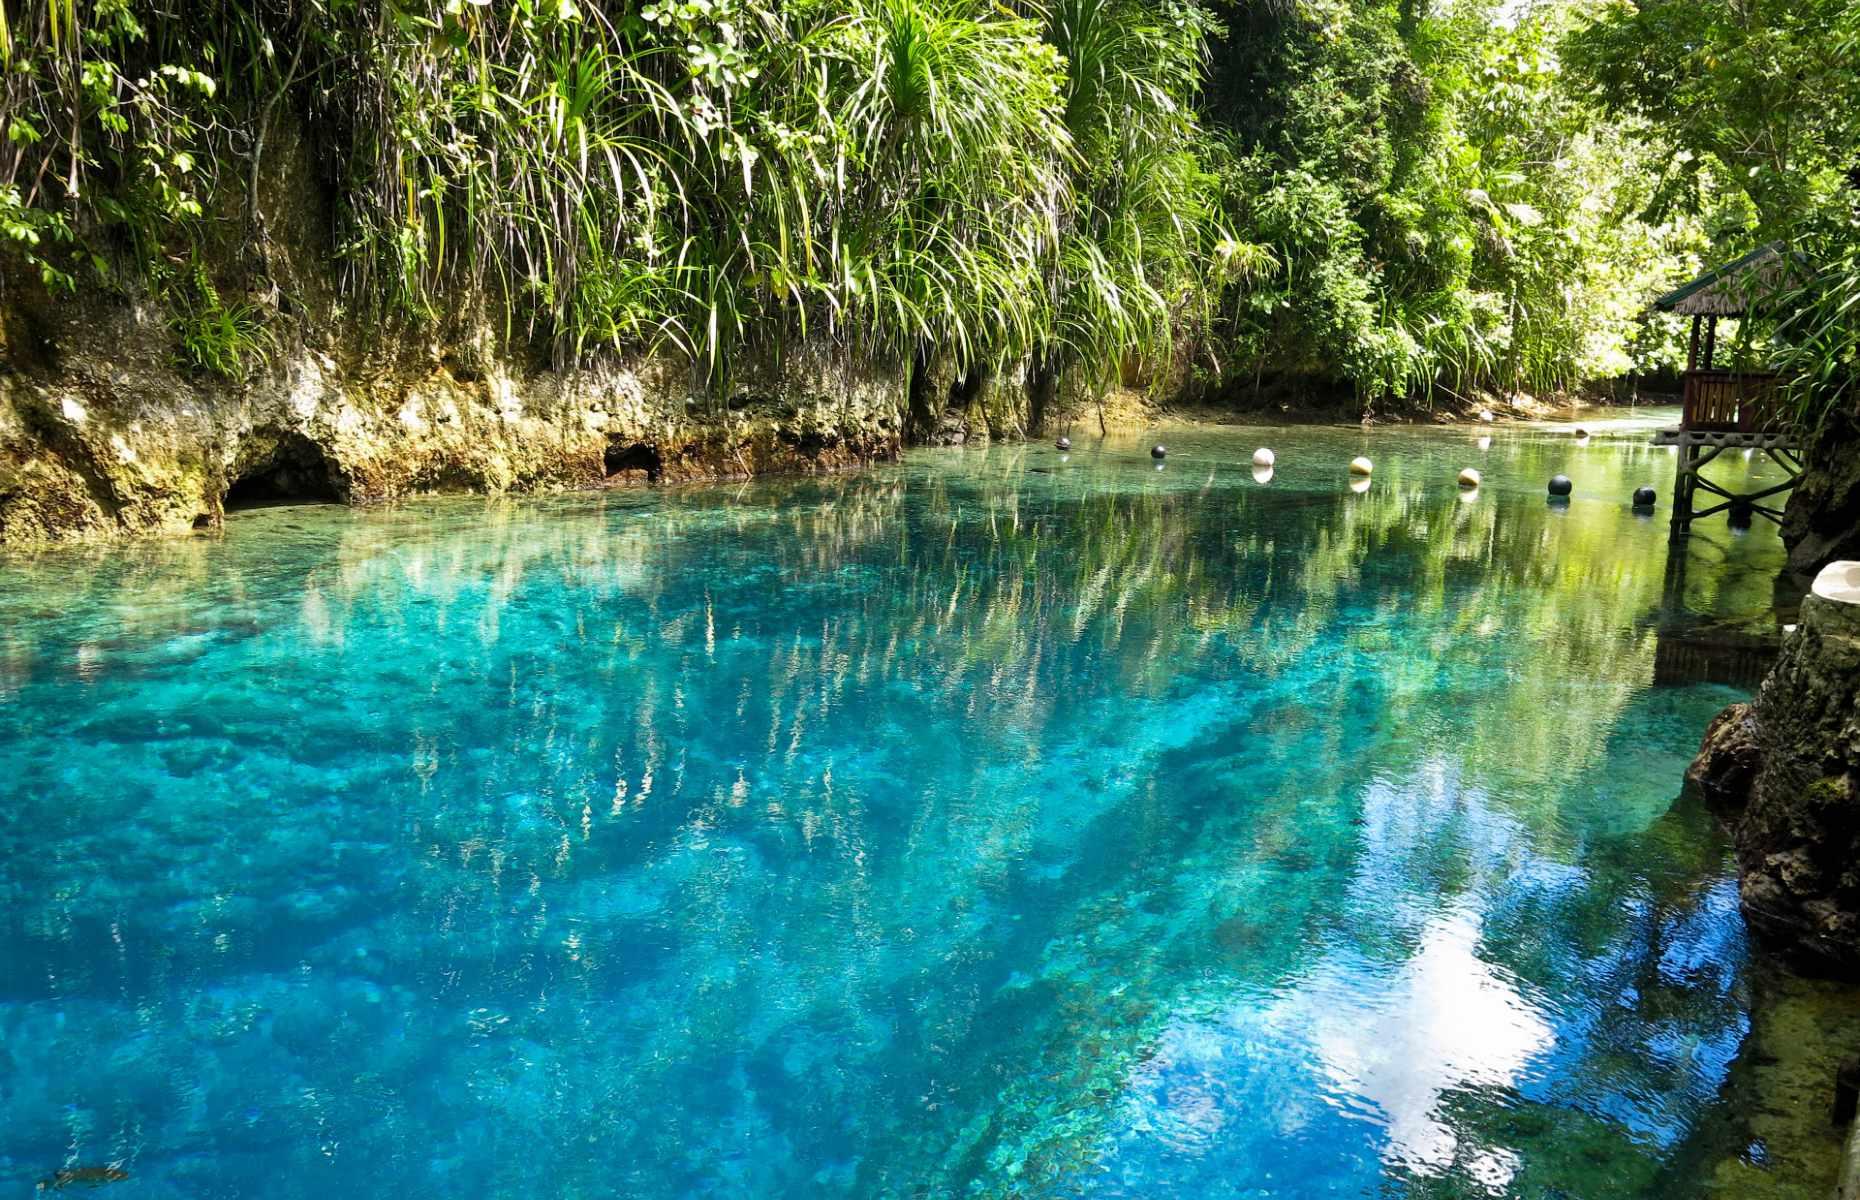 <p>Enchanted by name and (apparently) enchanted by nature, this eye-popping blue river flows through an area of thick forest on the island of Mindanao in the Philippines. Local lore suggests the magical waters are inhabited by mythical creatures including engkanto (a kind of environmental spirit), and that sapphire and jade from fairies’ wands are responsible for its dramatic color. But the biggest mystery of all is that this saltwater river has no apparent source.</p>